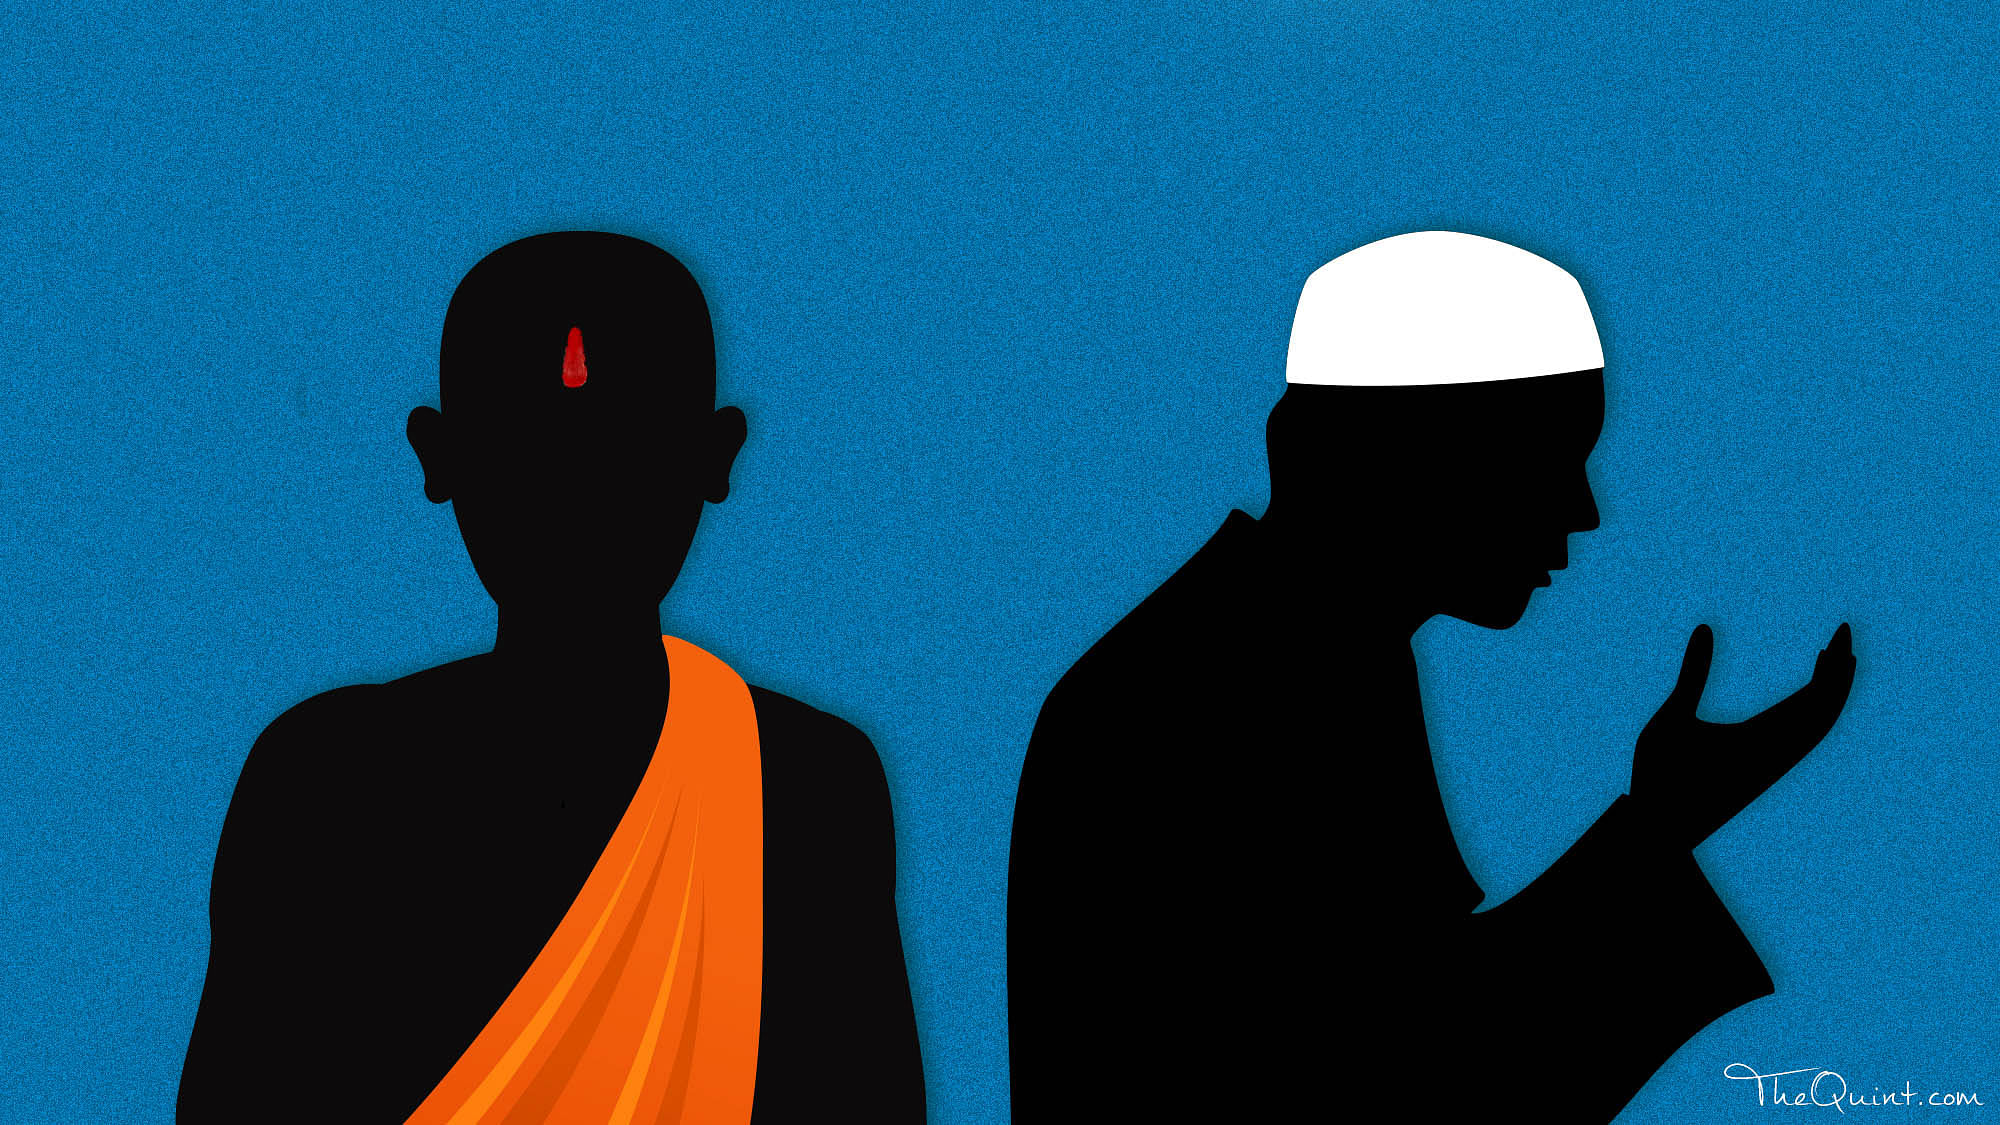 Born in a brahminical order, why is it that an individual is taught to perceive Muslims as the ‘other’?